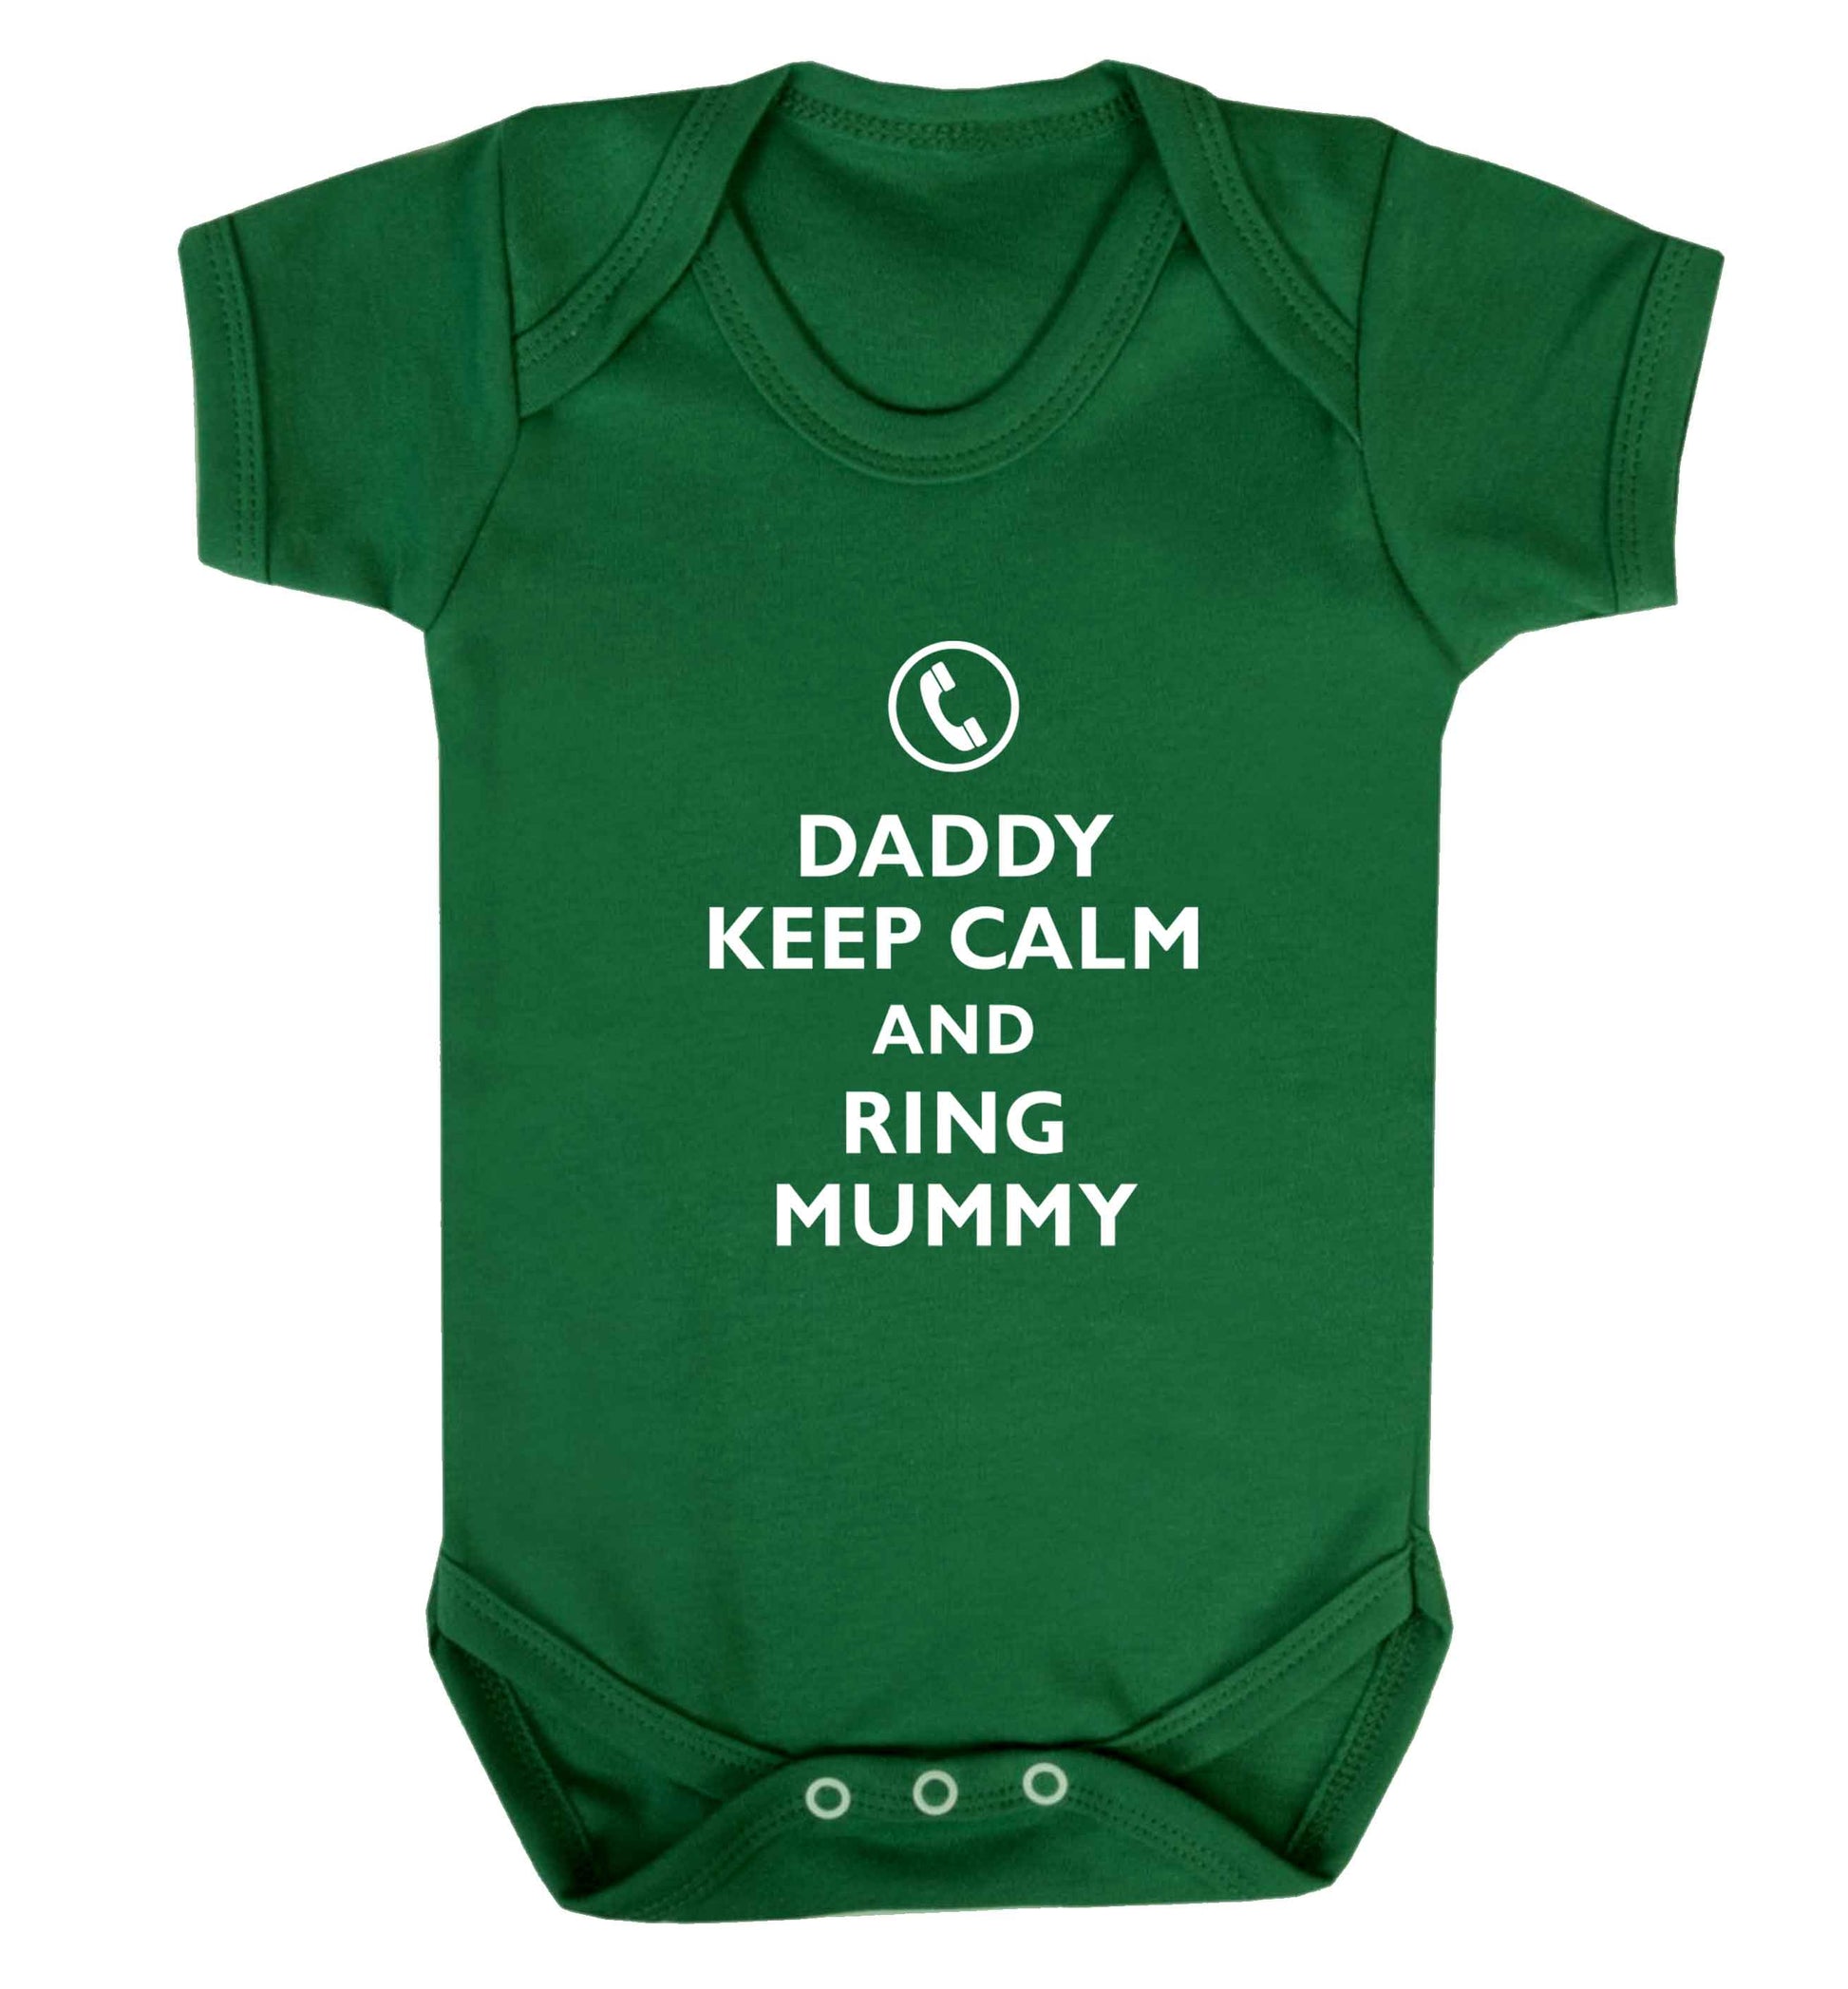 Daddy keep calm and ring mummy baby vest green 18-24 months